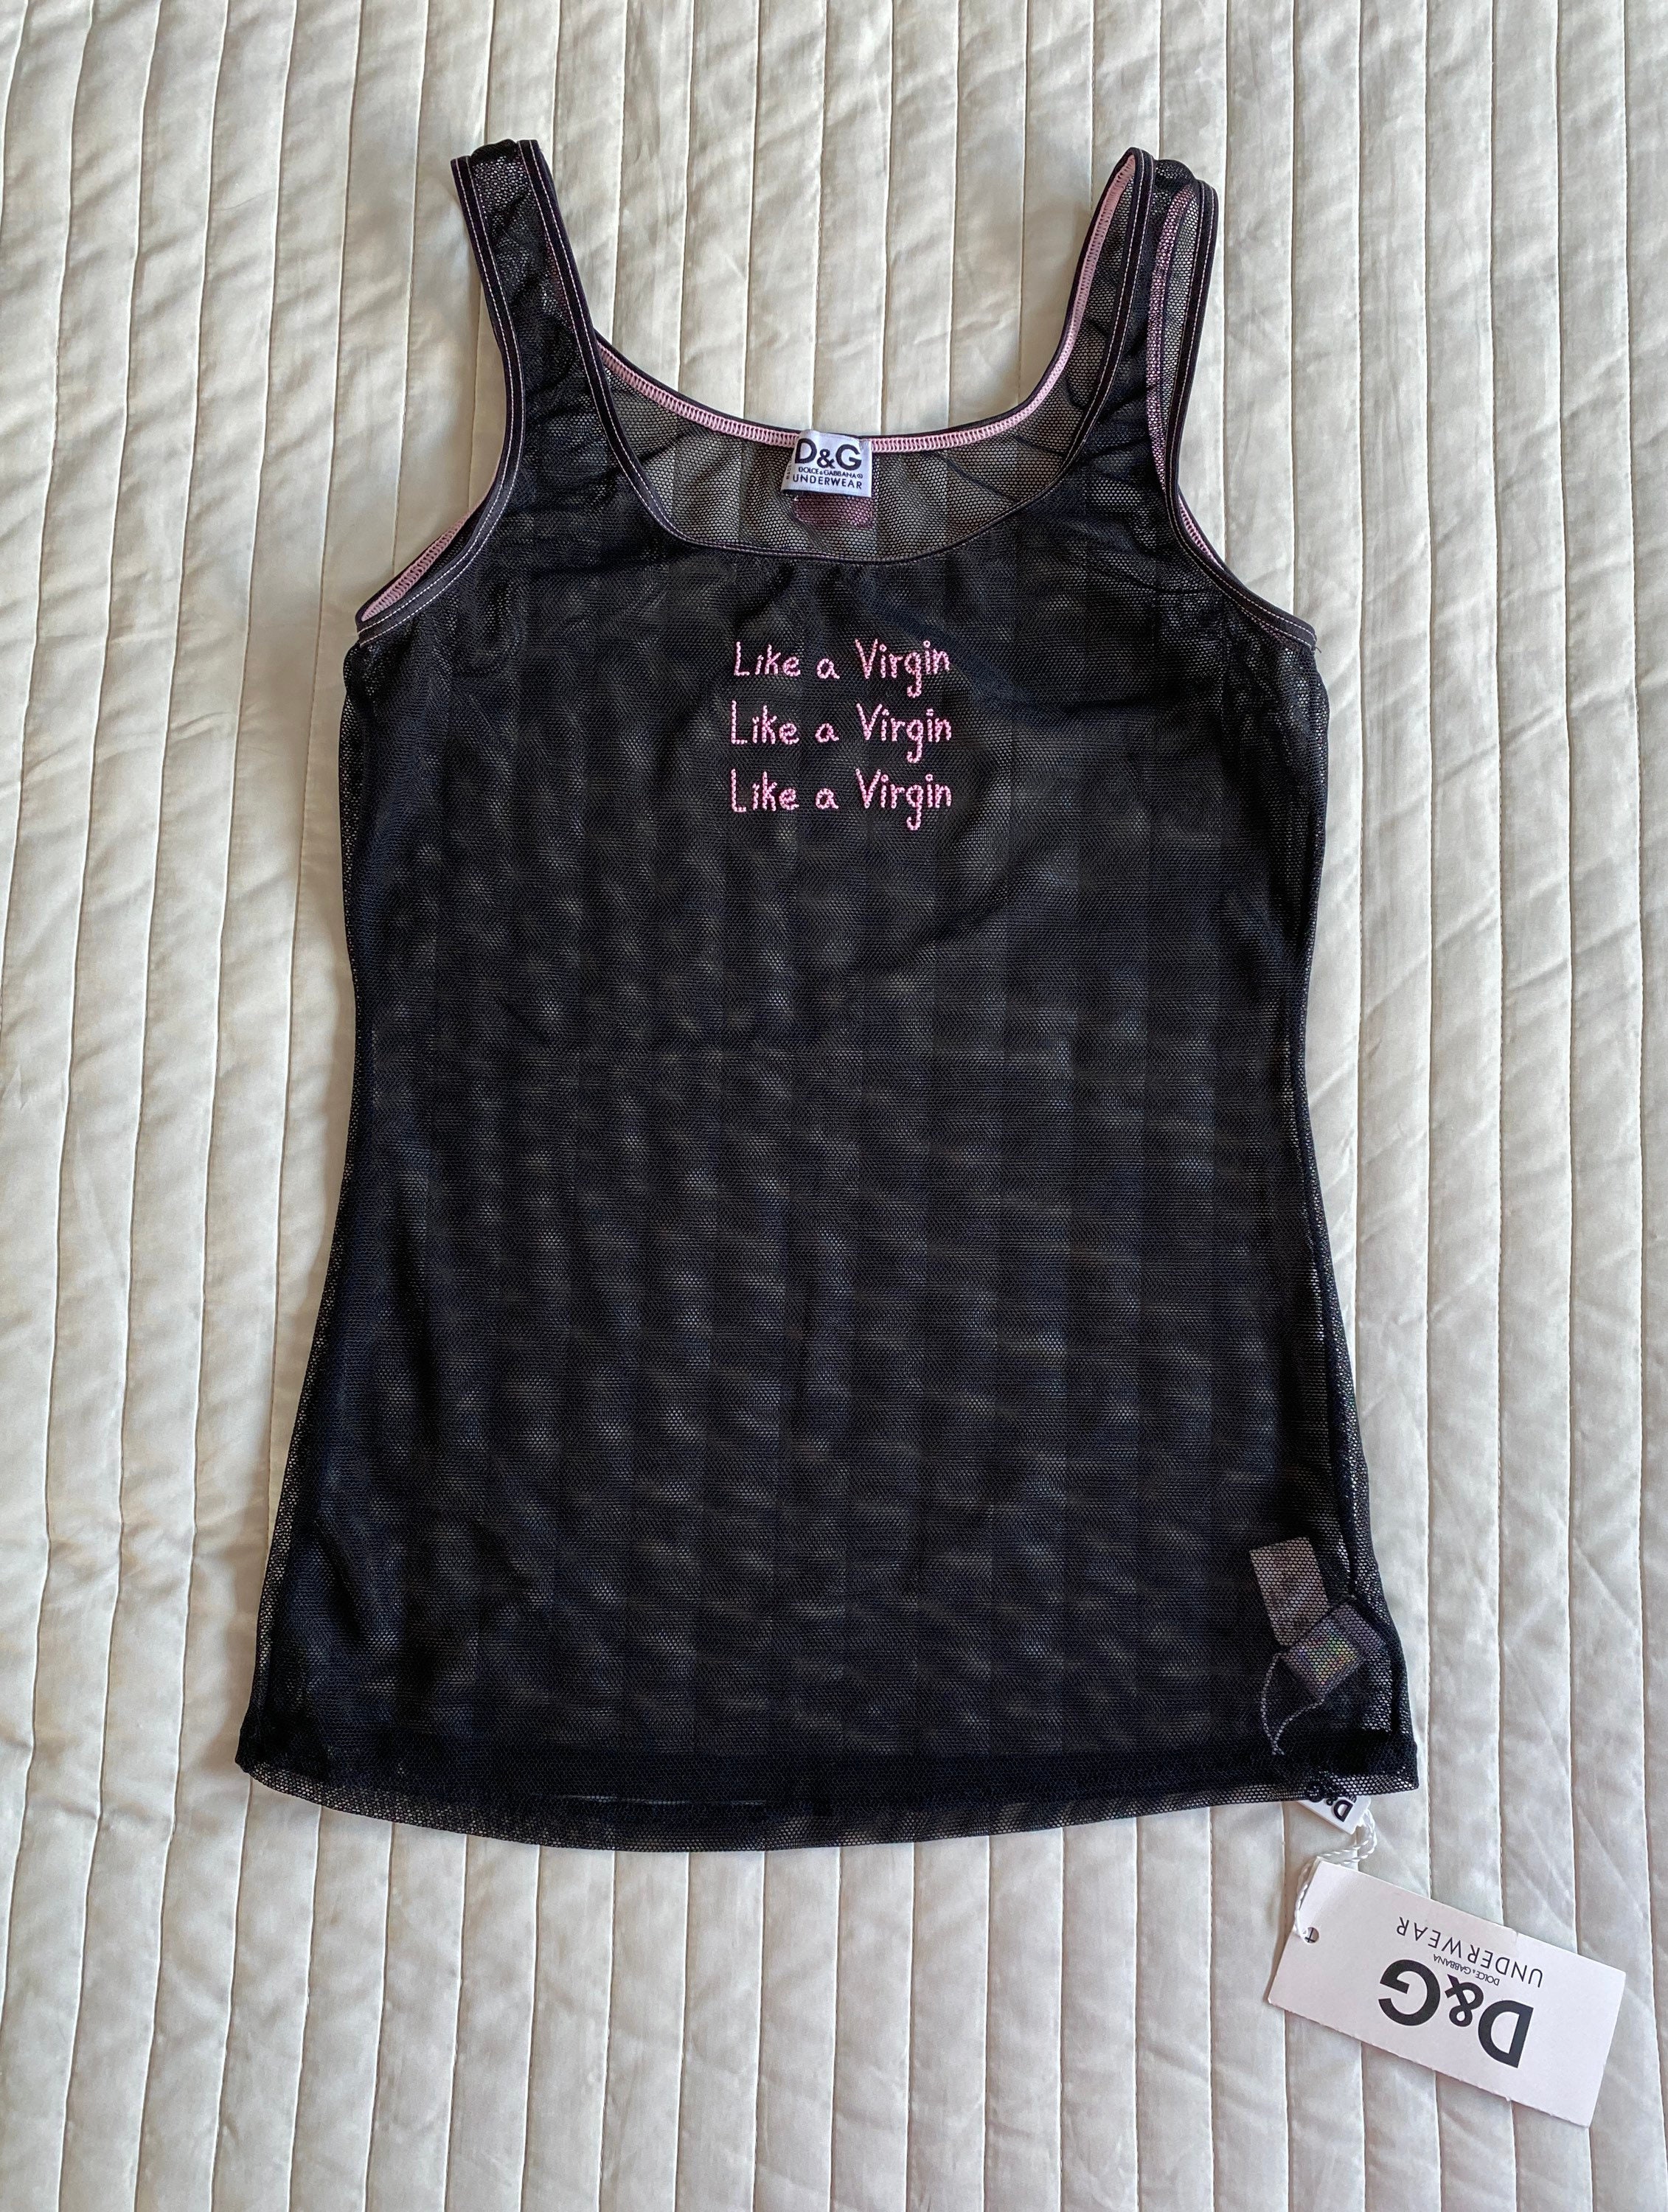 Kleding Dameskleding Tops & T-shirts Tanktops Dolce Gabbana y2k coquette black mesh camisole with pink contrast stitching and the text „Like a virgin“ 